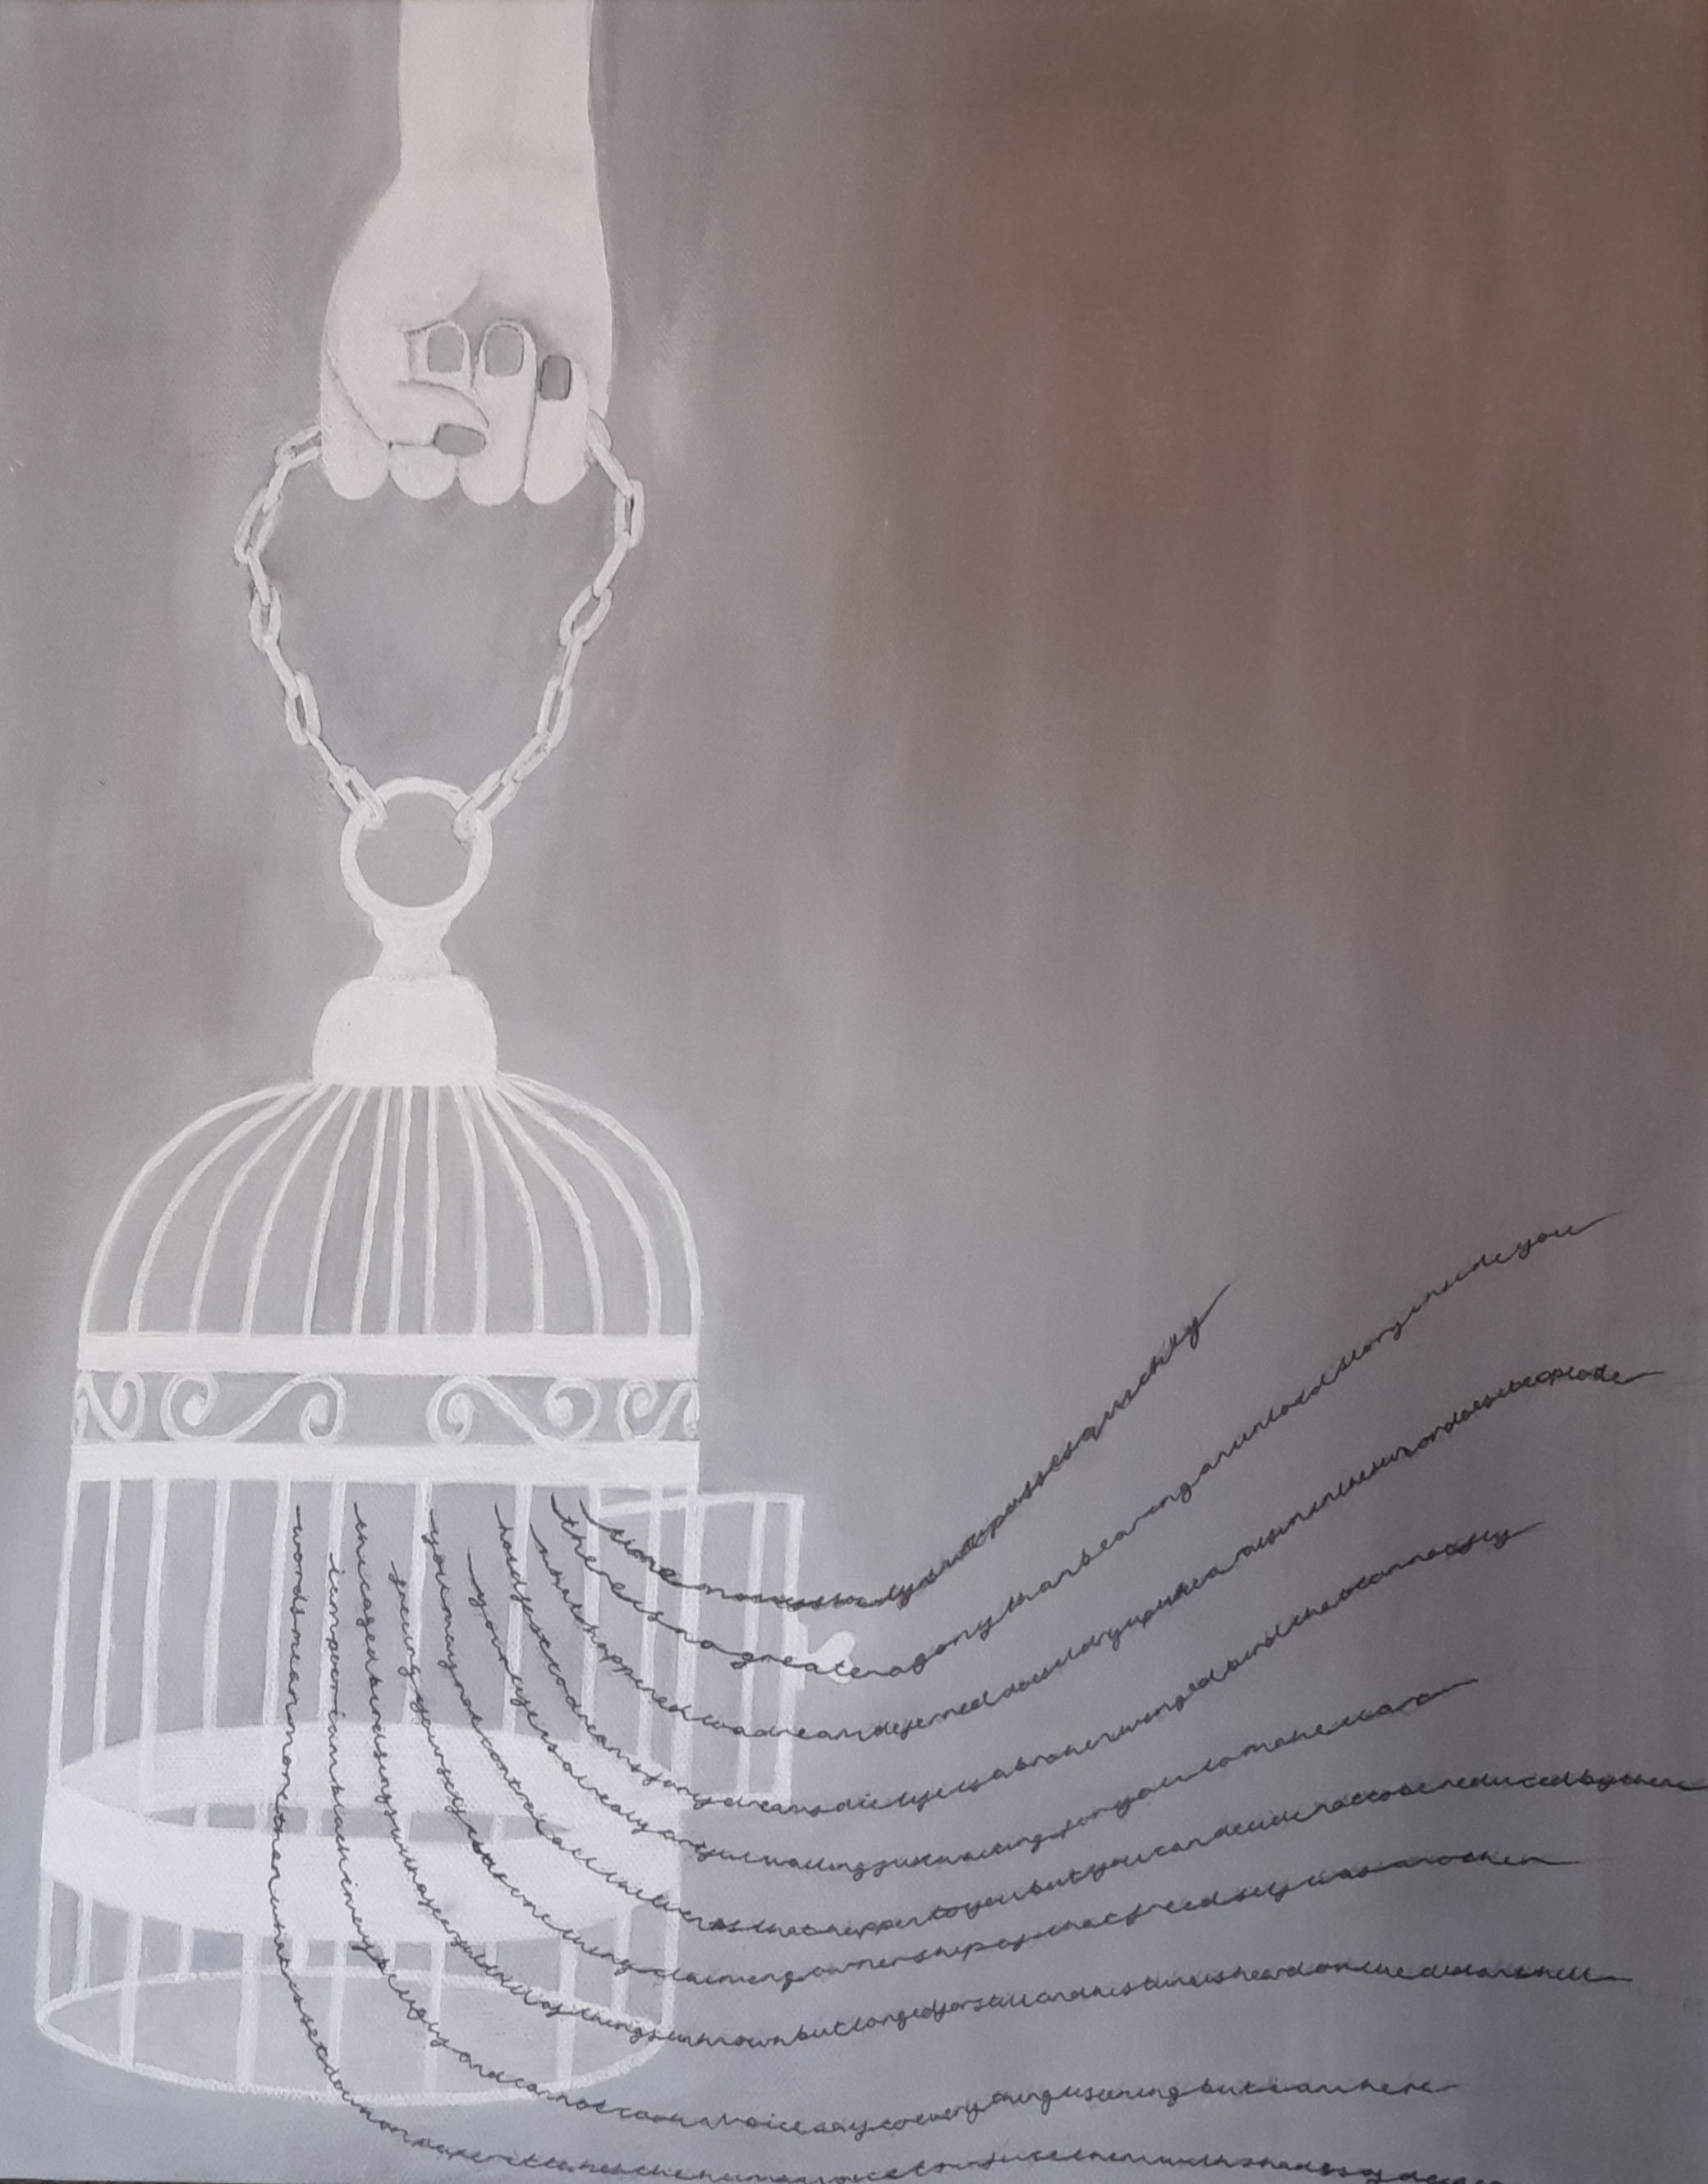 Monochrome paining of birdcage with lines of words escaping